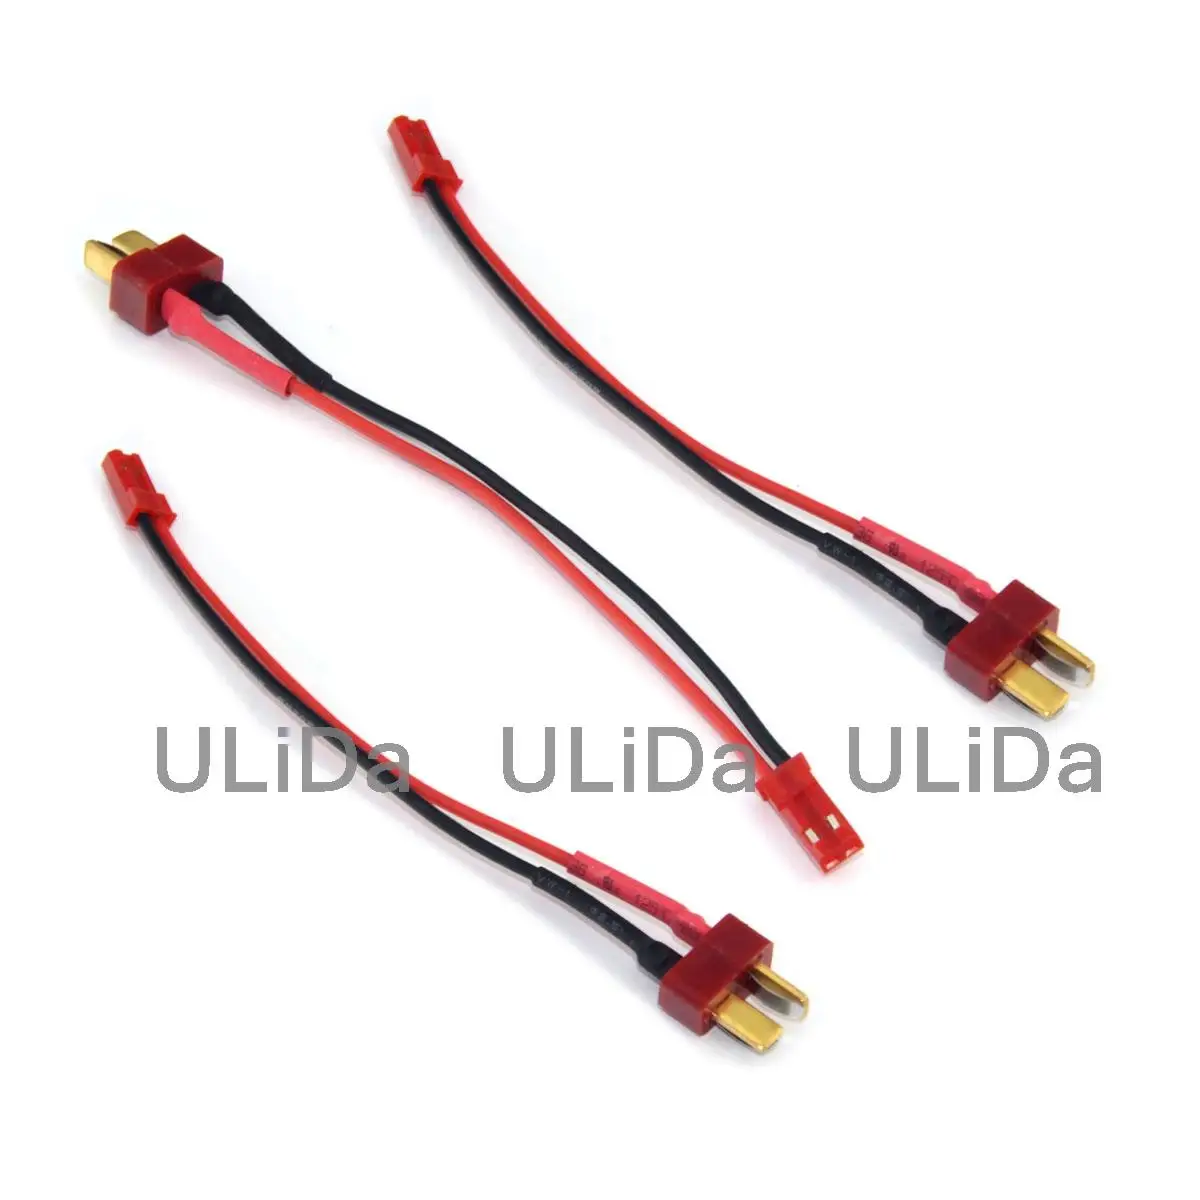 

3PCS T-Plug (Deans Style) Male To JST Adapter with 10CM 22awg Wire for Rc Lipo Battery Helicopter Quadcopter Multirotor